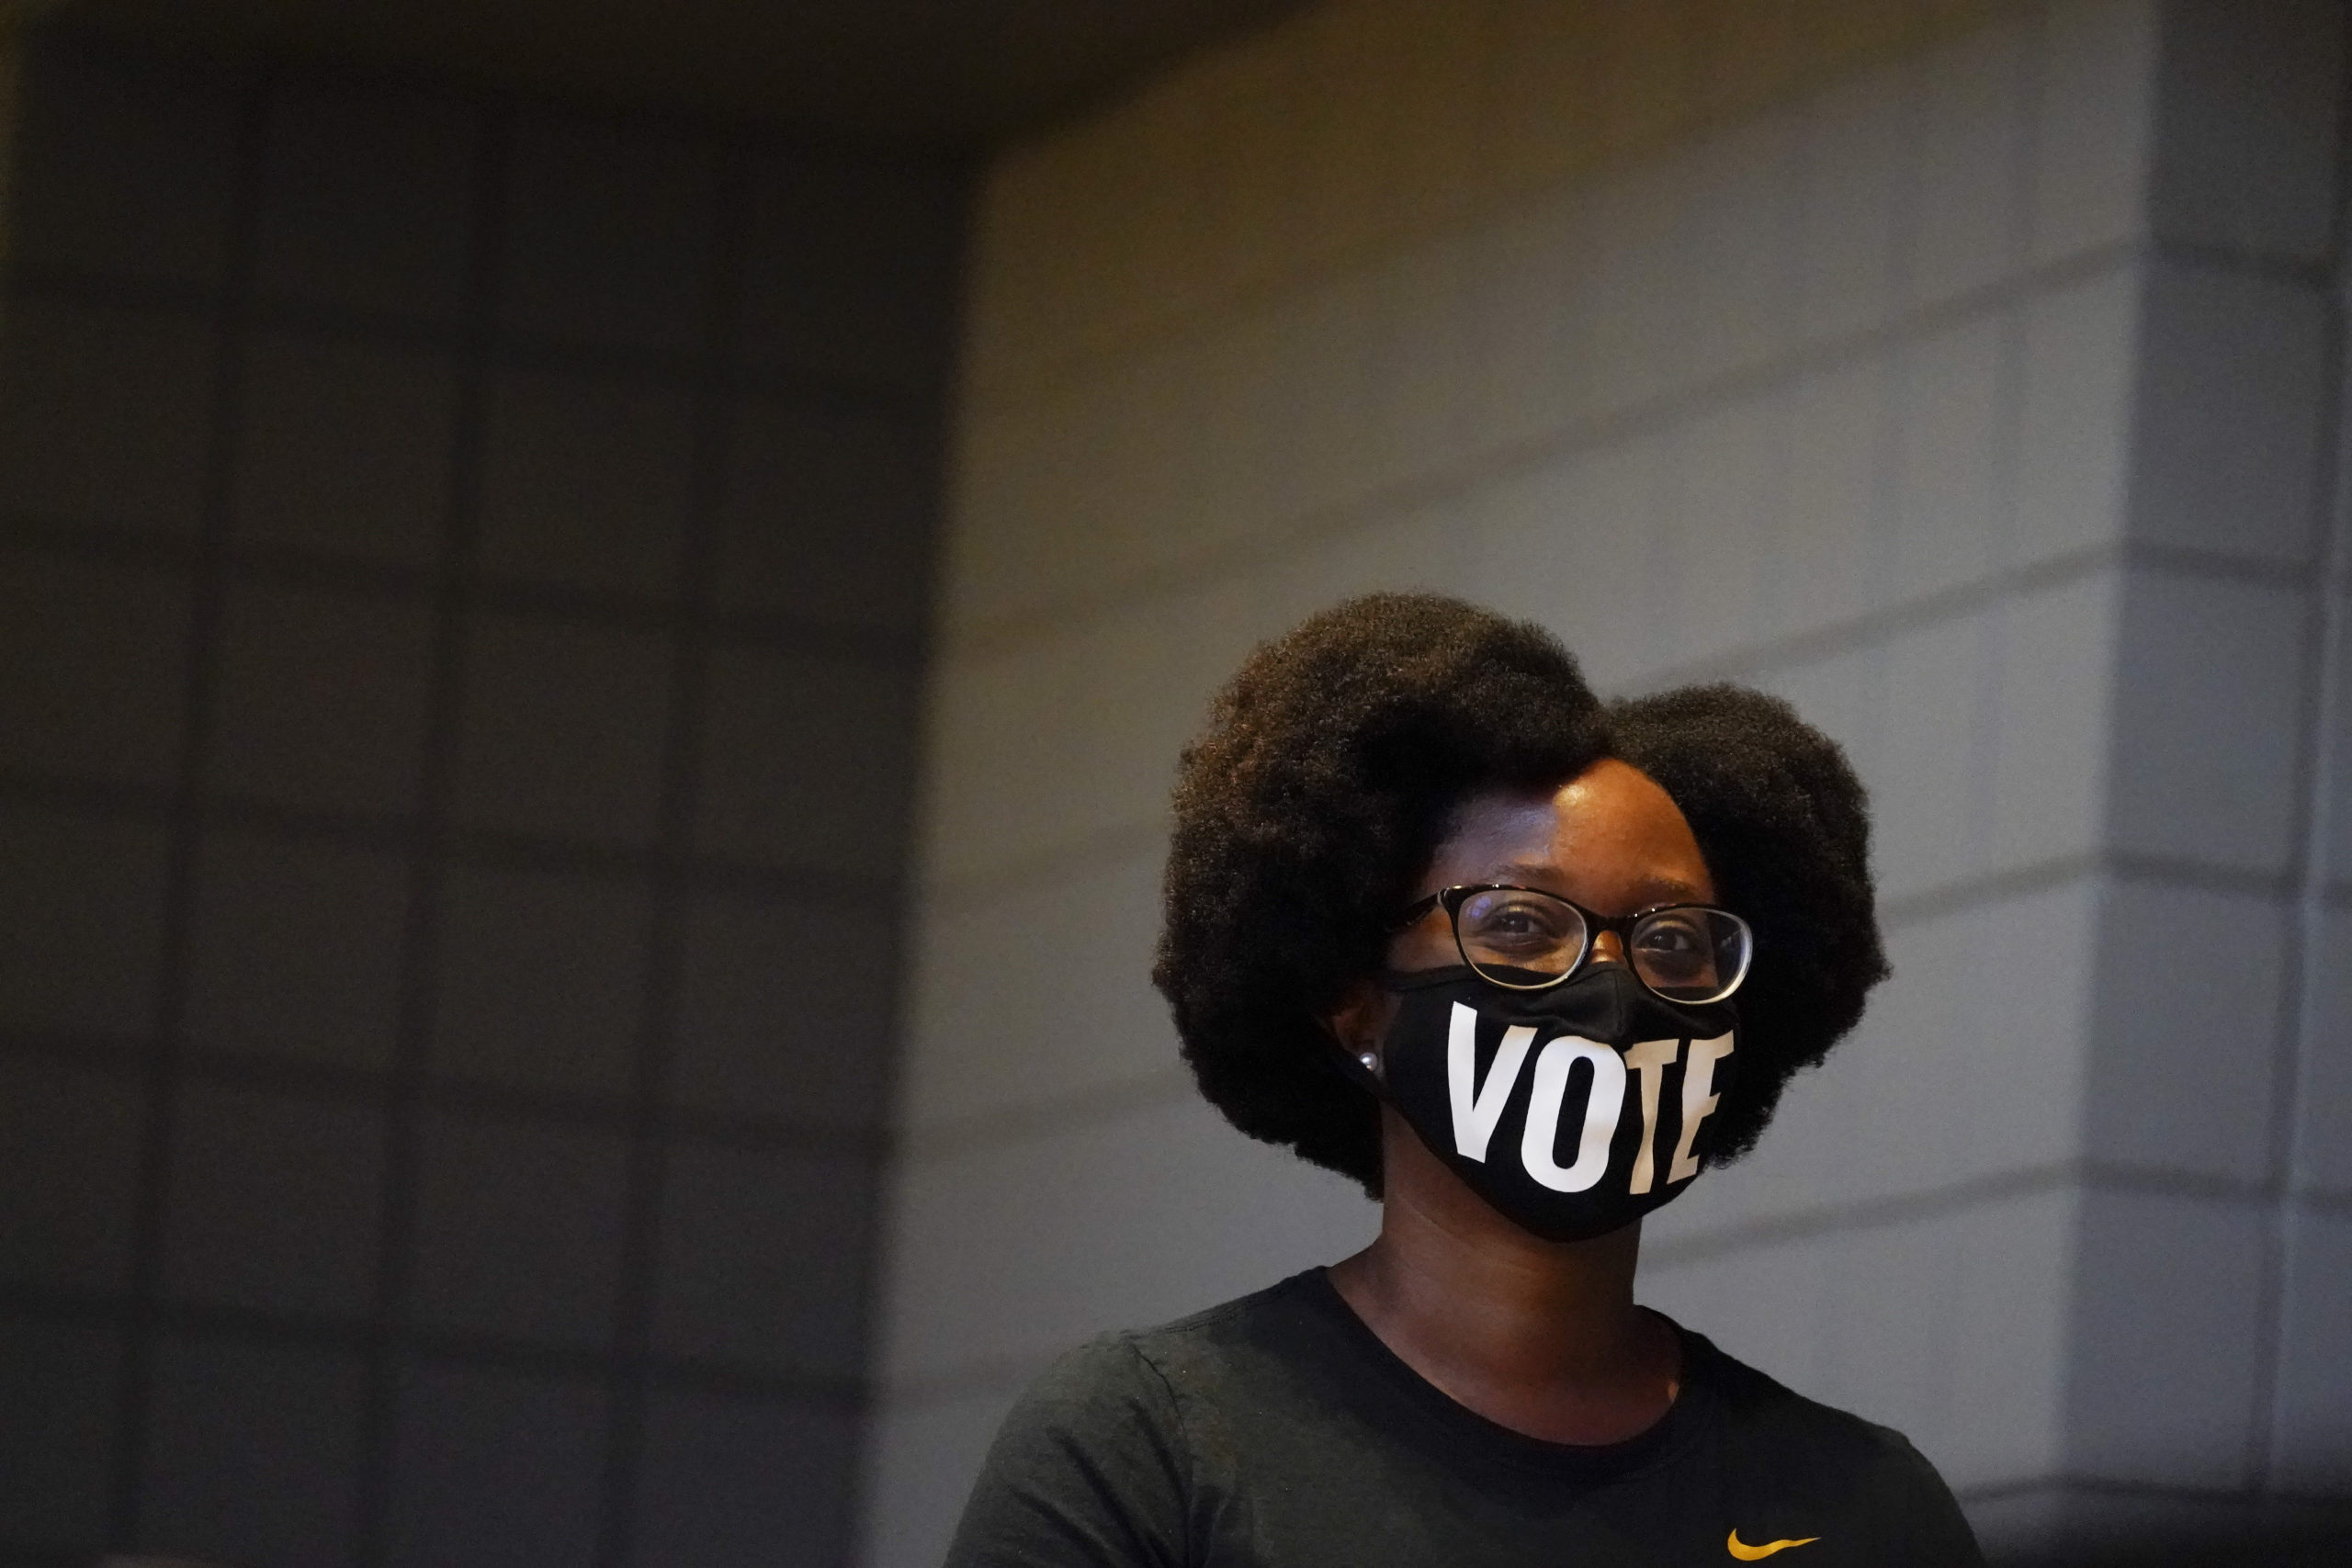 Ashley Nealy, of Atlanta waits in a line to vote early at the State Farm Arena in Atlanta in Oct. 2020. Errin Haines of The 19th* notes that Black women vote at higher rates because they understand the stakes